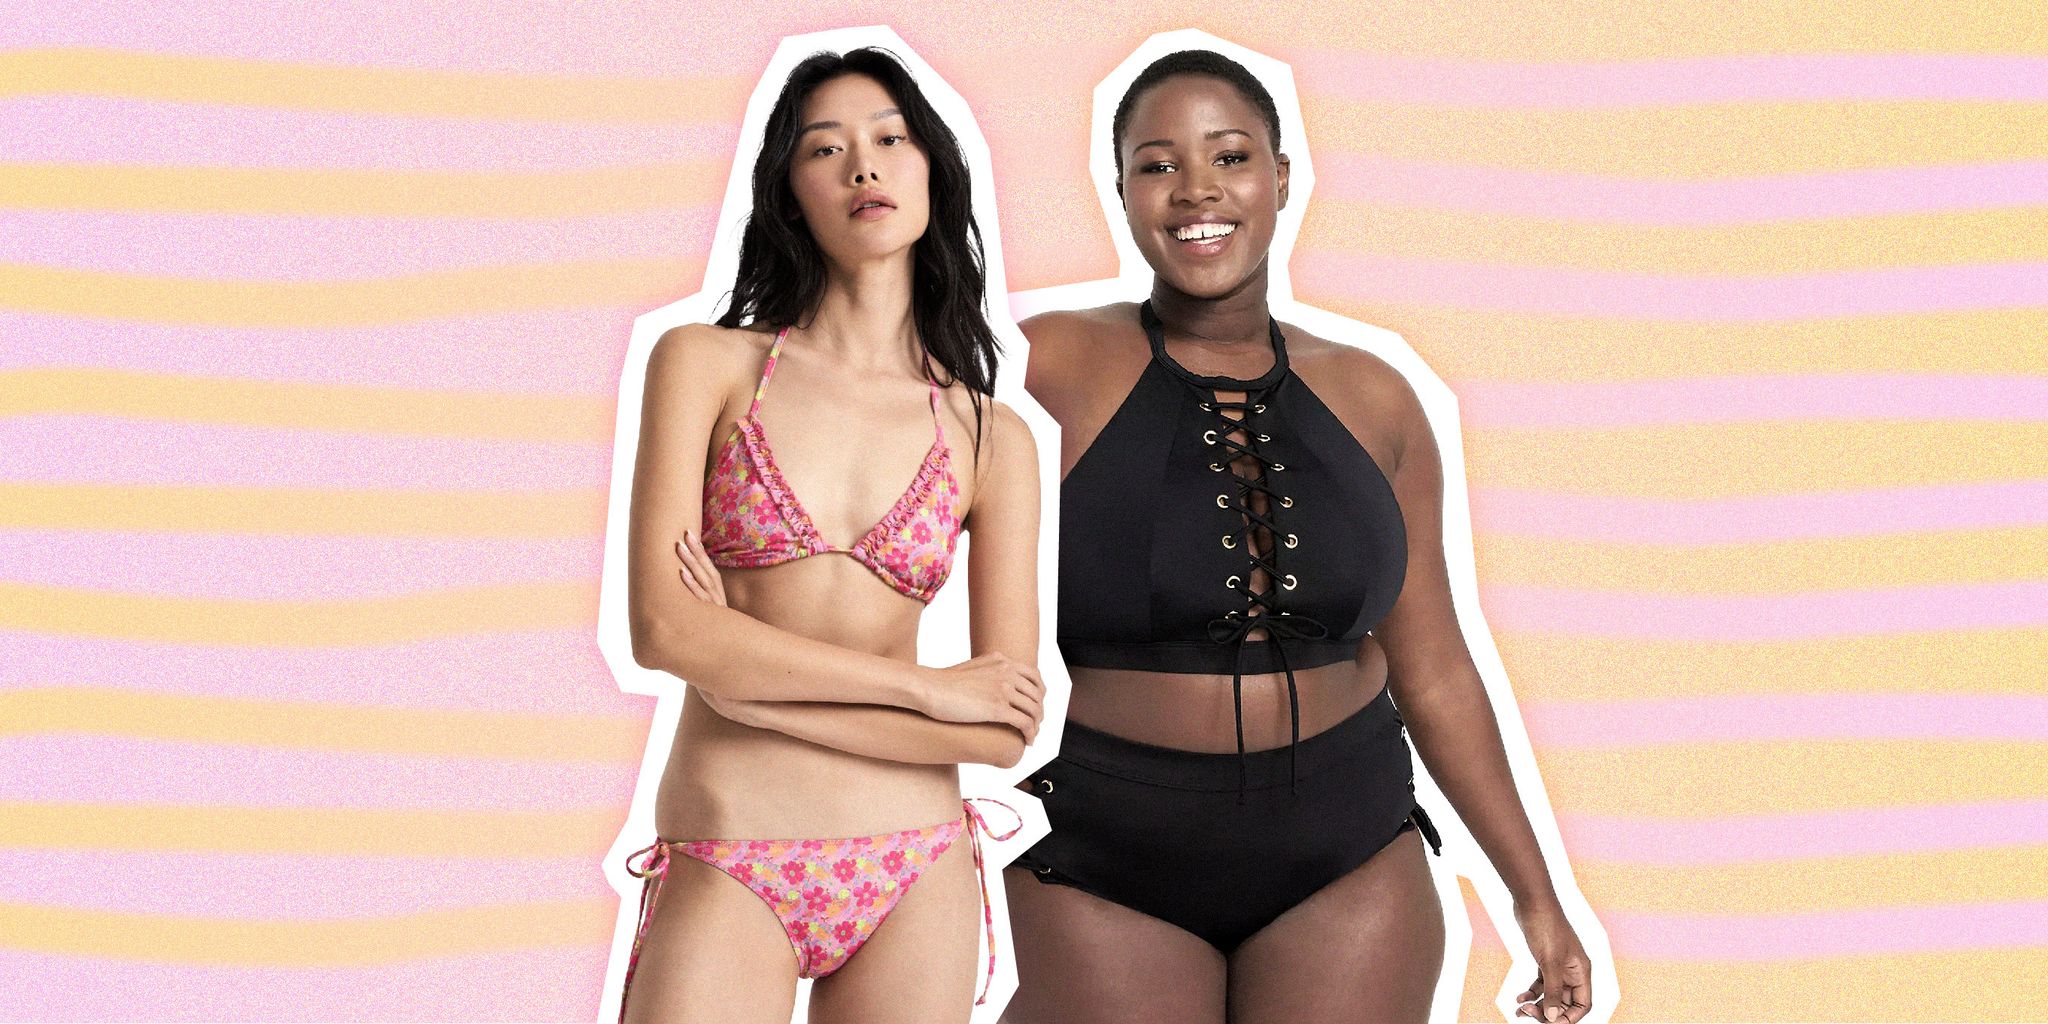 Swimsuit shopping tips for women with large busts, according to